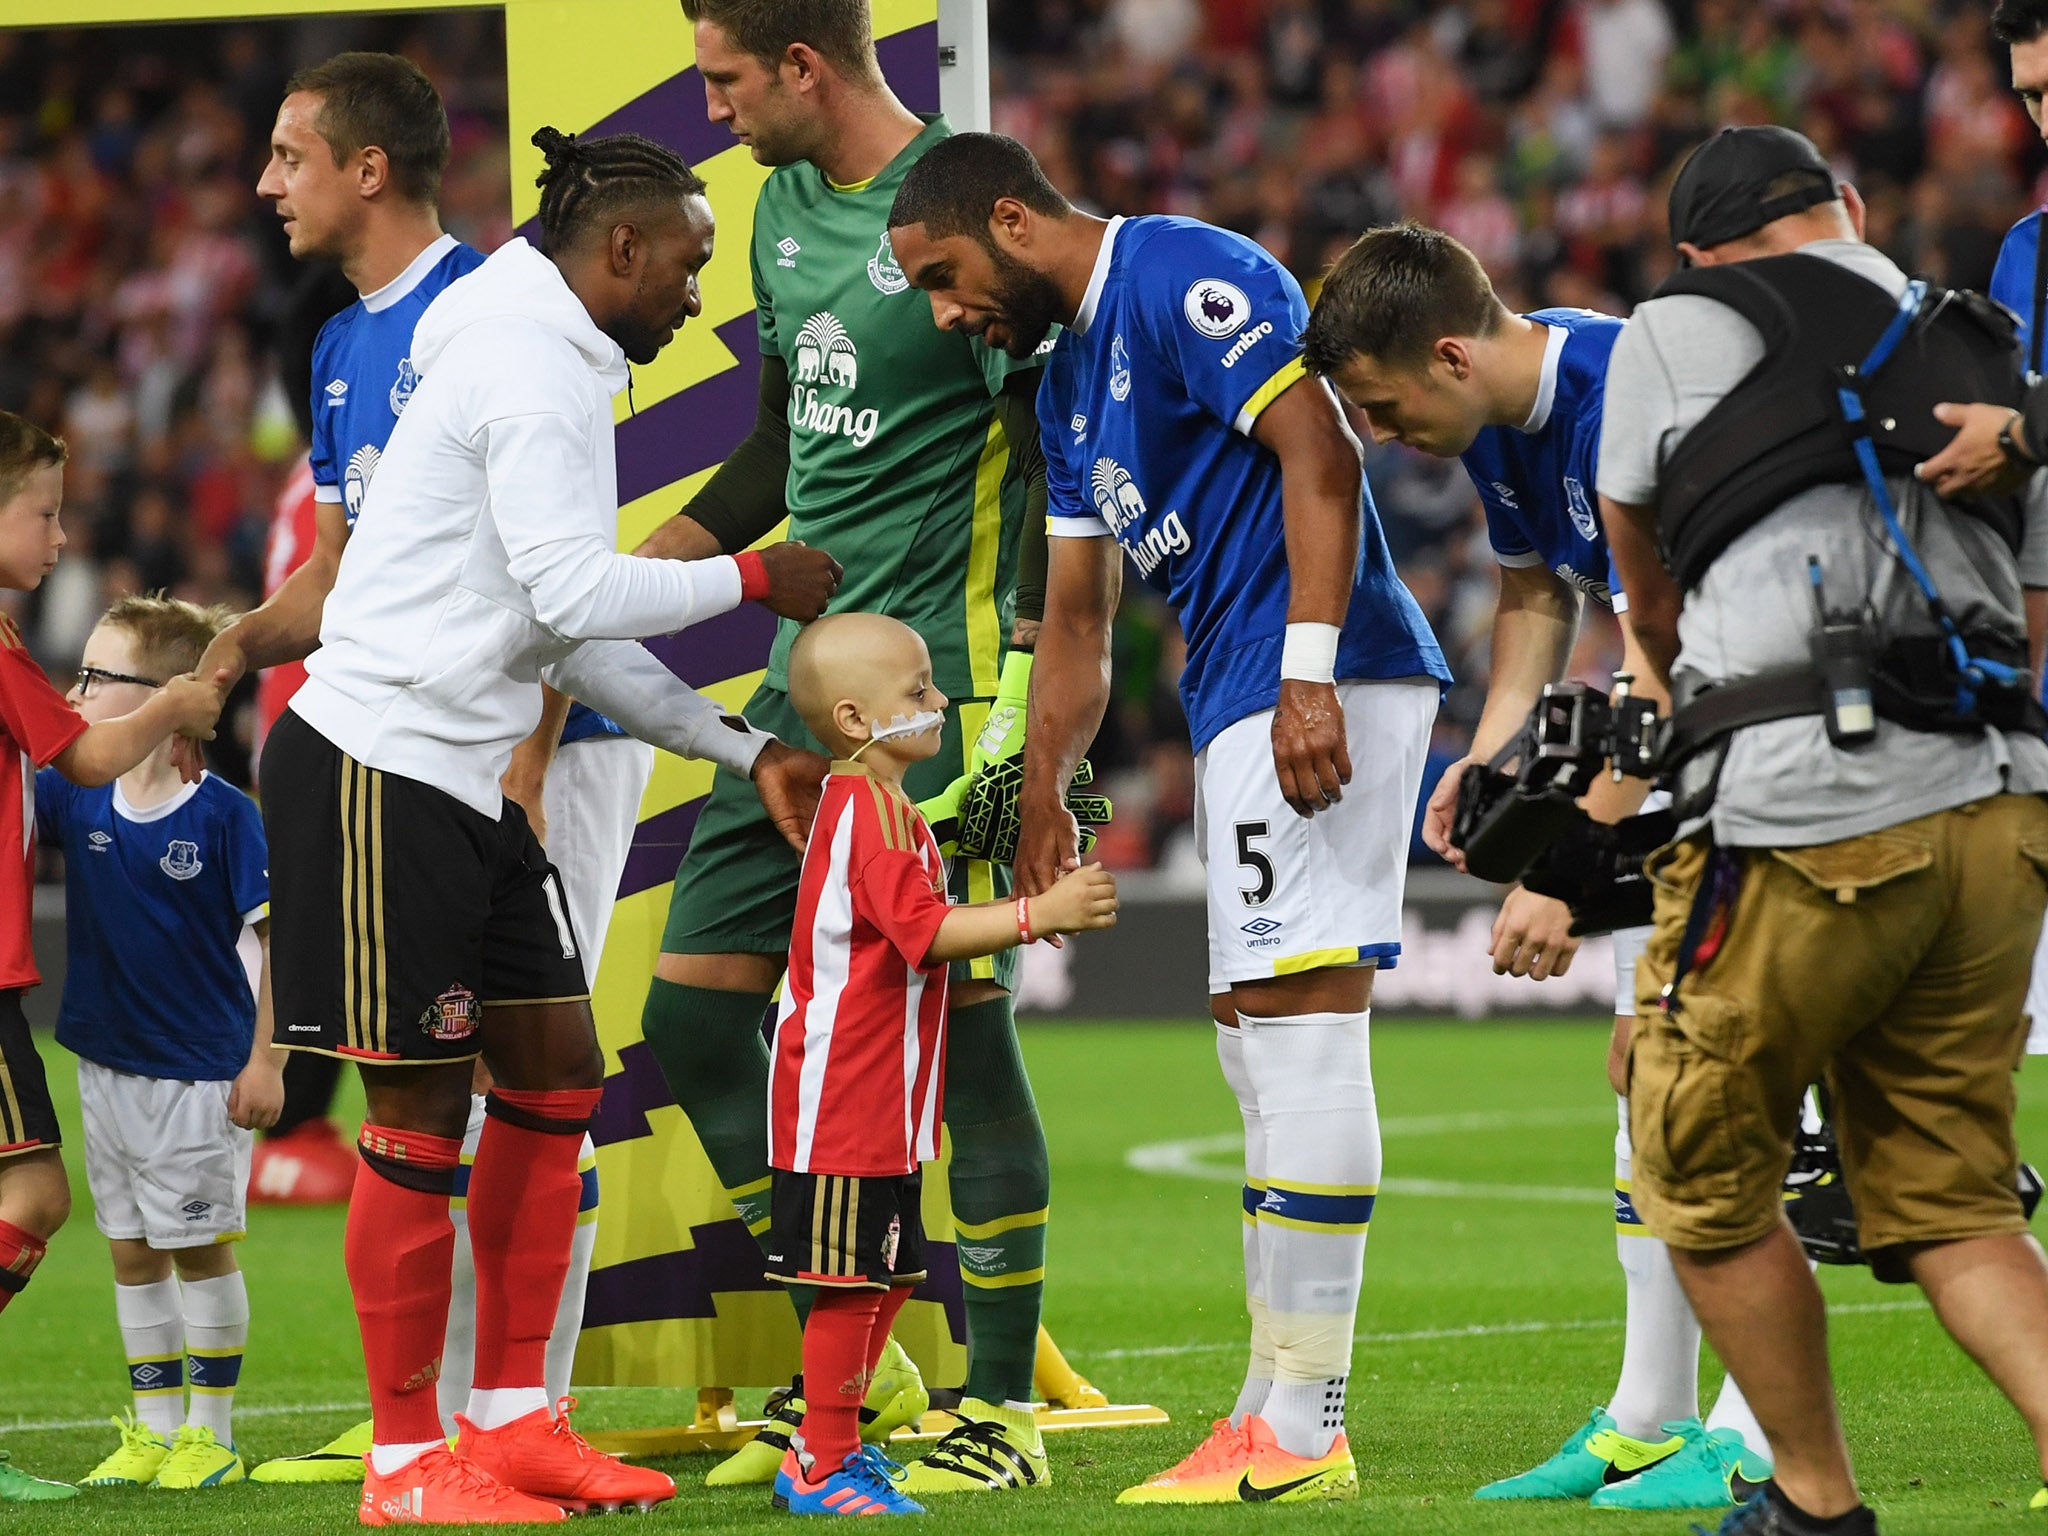 Bradley Lowery led the teams out before the game